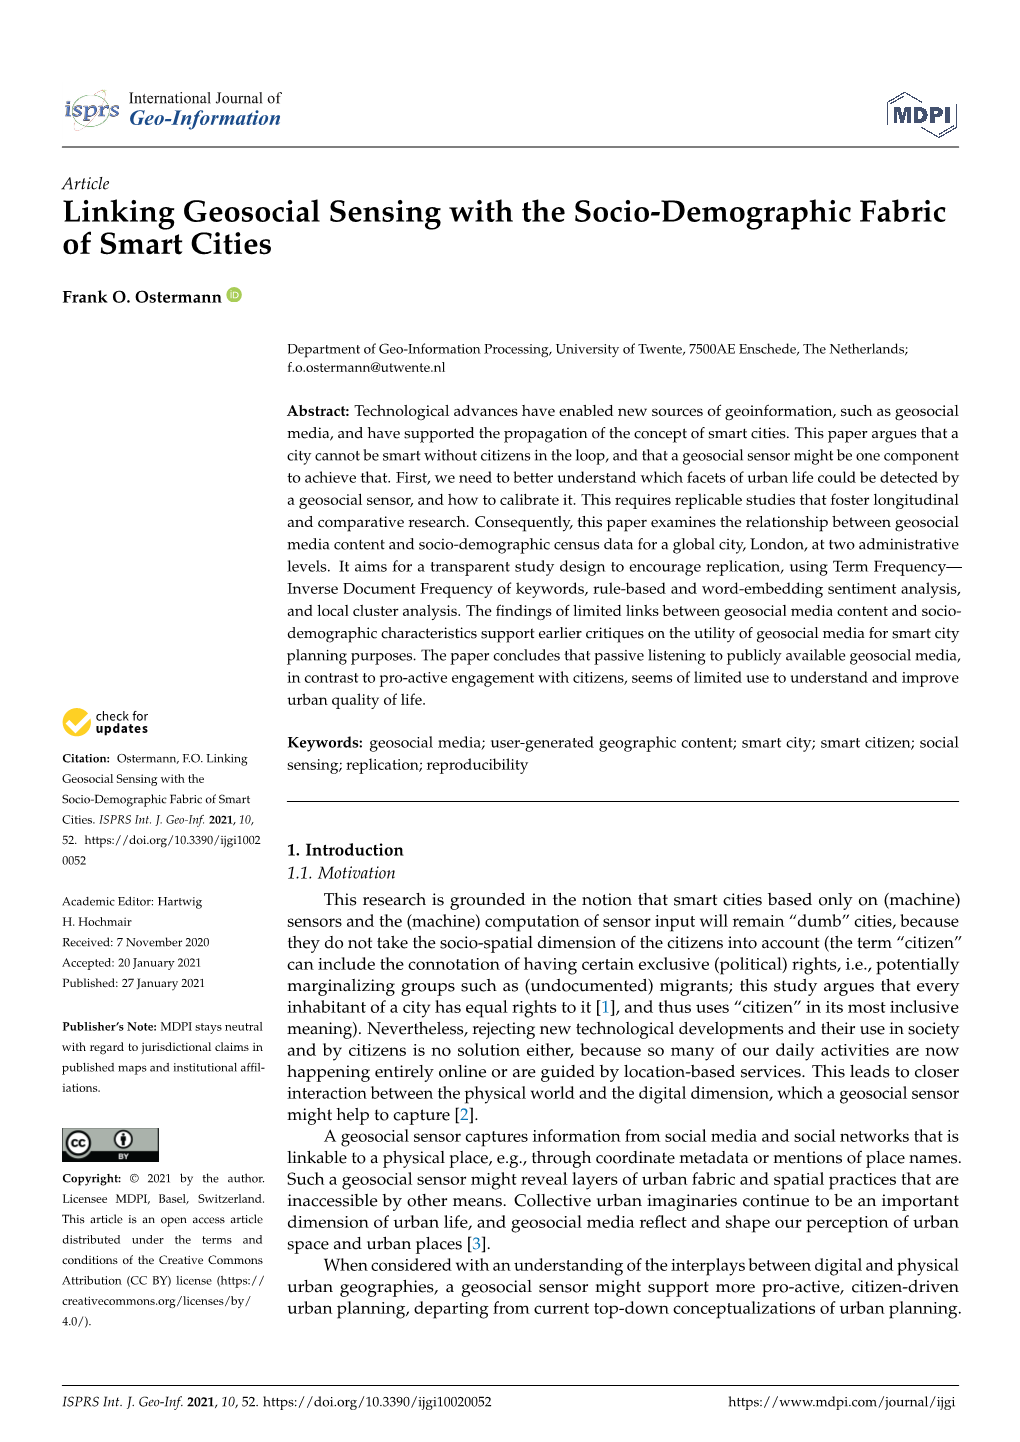 Linking Geosocial Sensing with the Socio-Demographic Fabric of Smart Cities